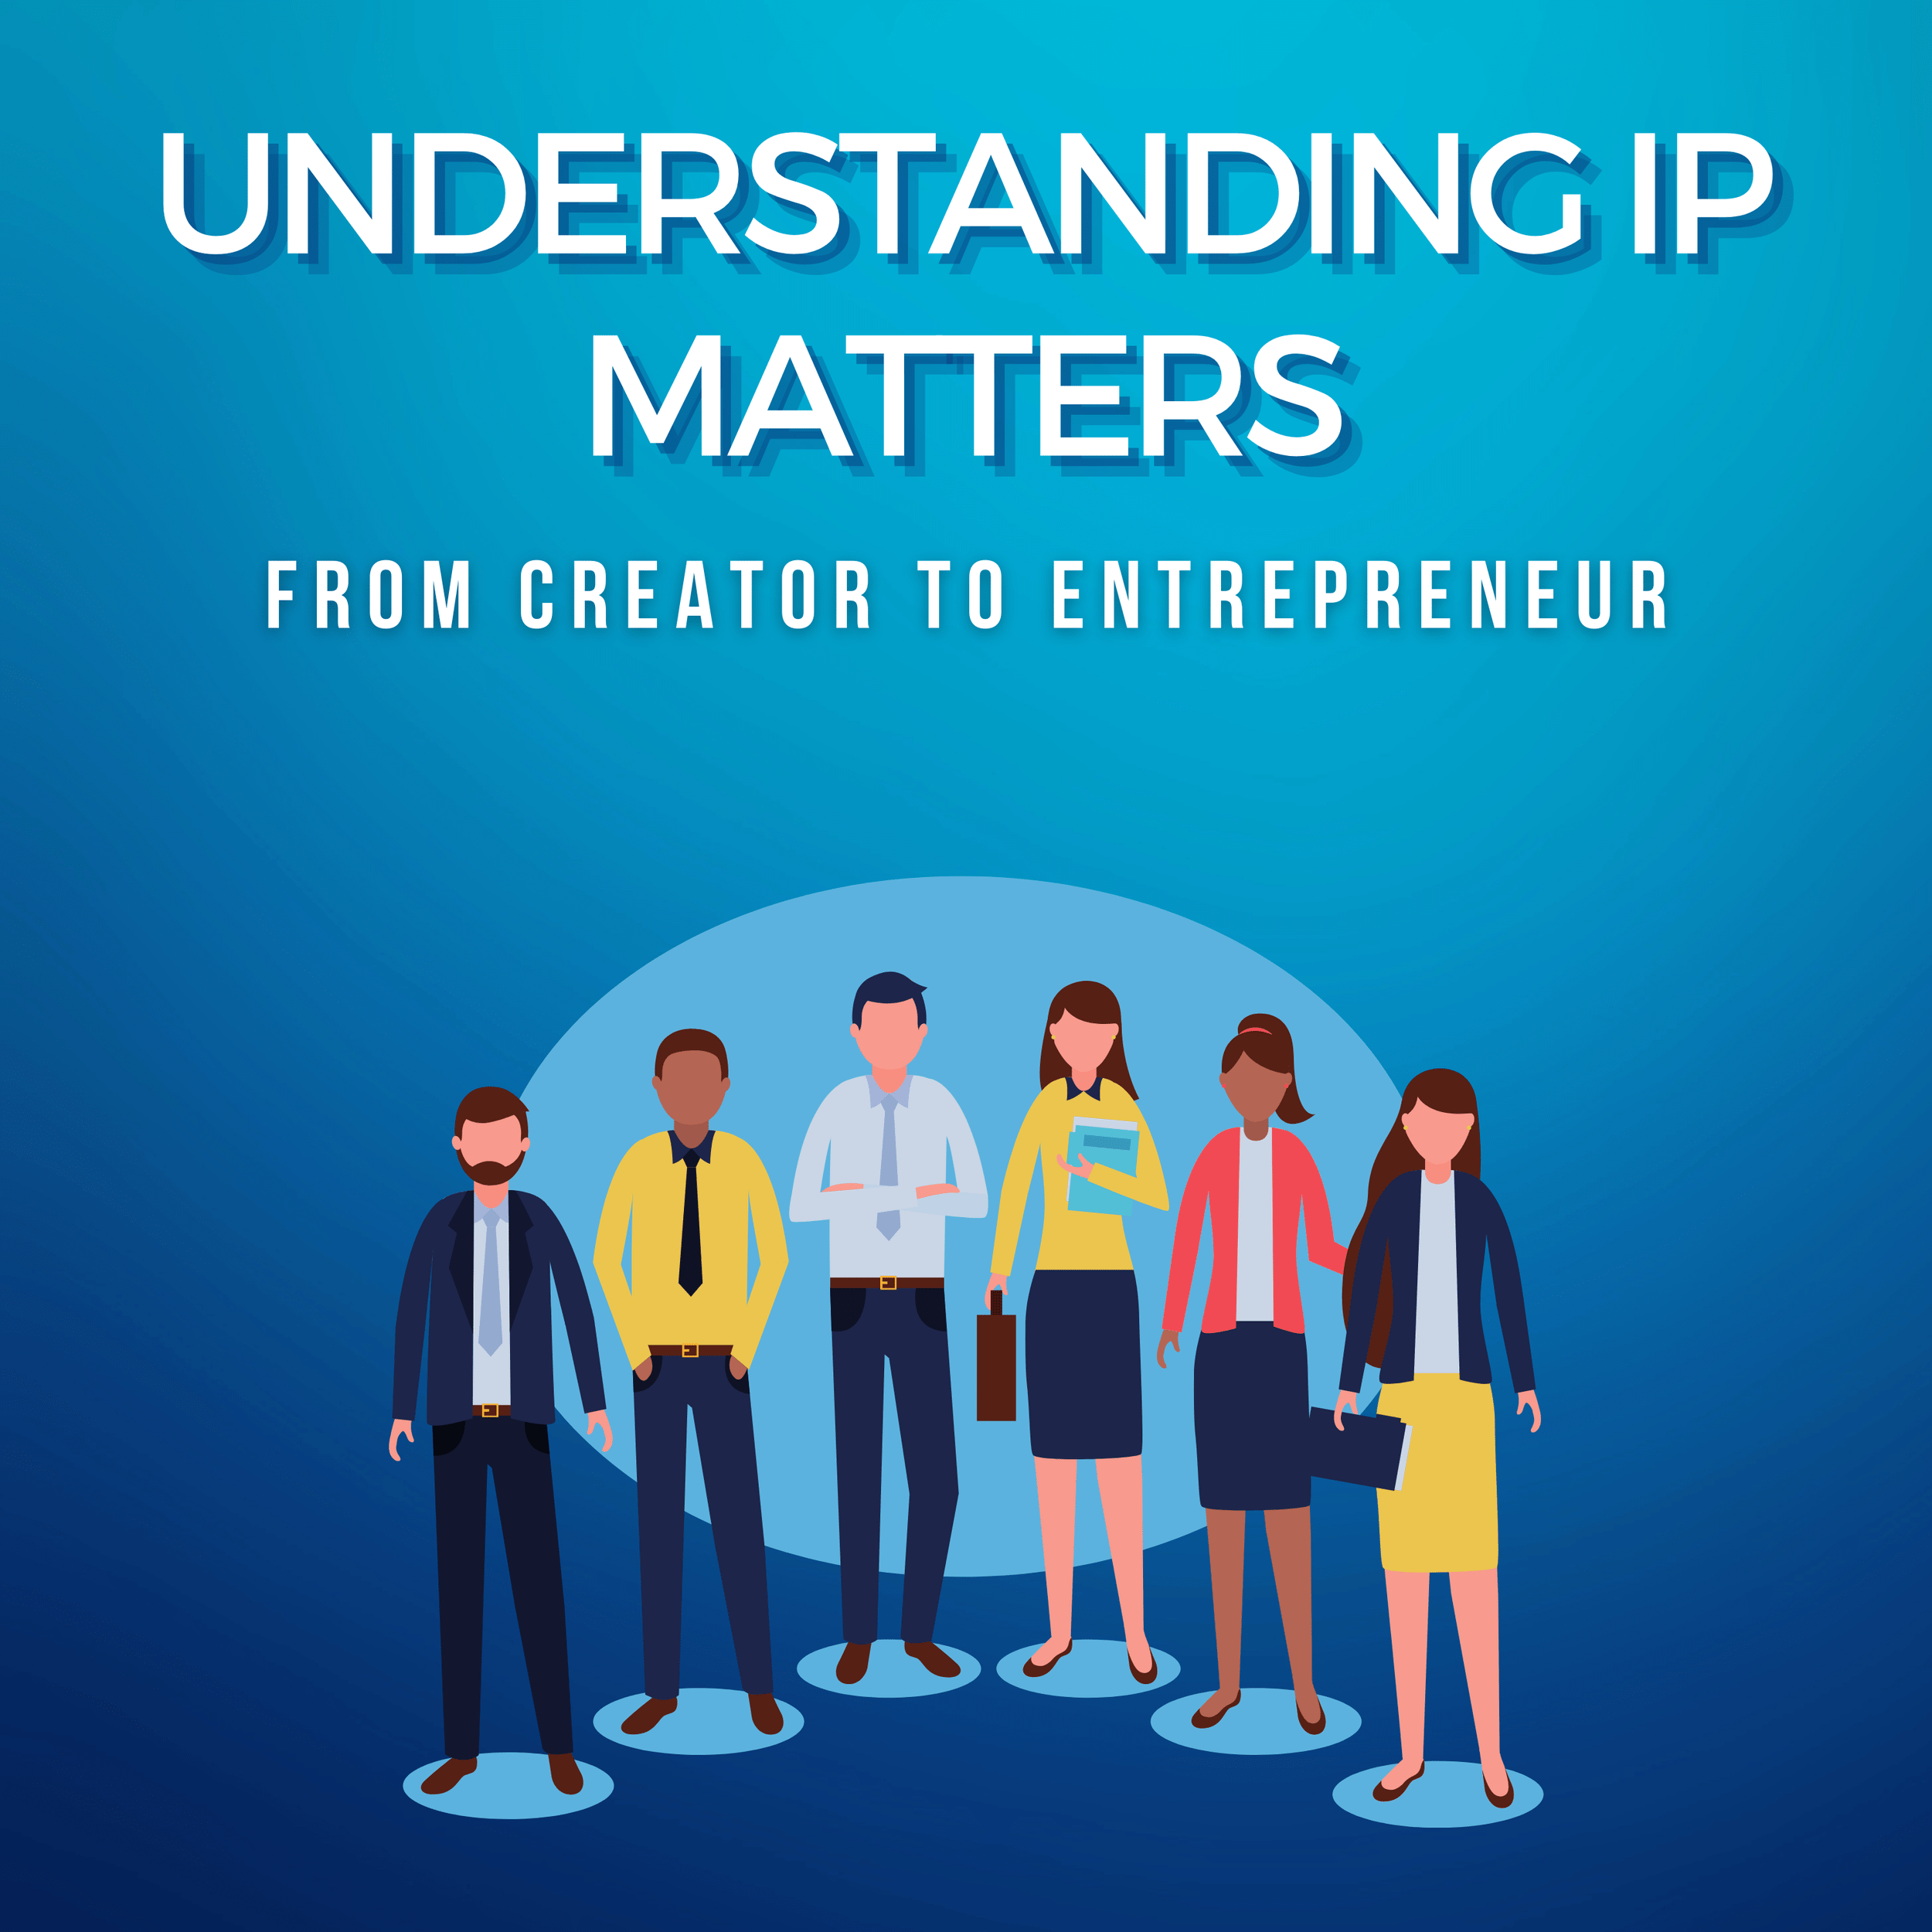 Dr. Gary Michelson Advocates for IP Education for All Students on ‘Understanding IP Matters’ Podcast